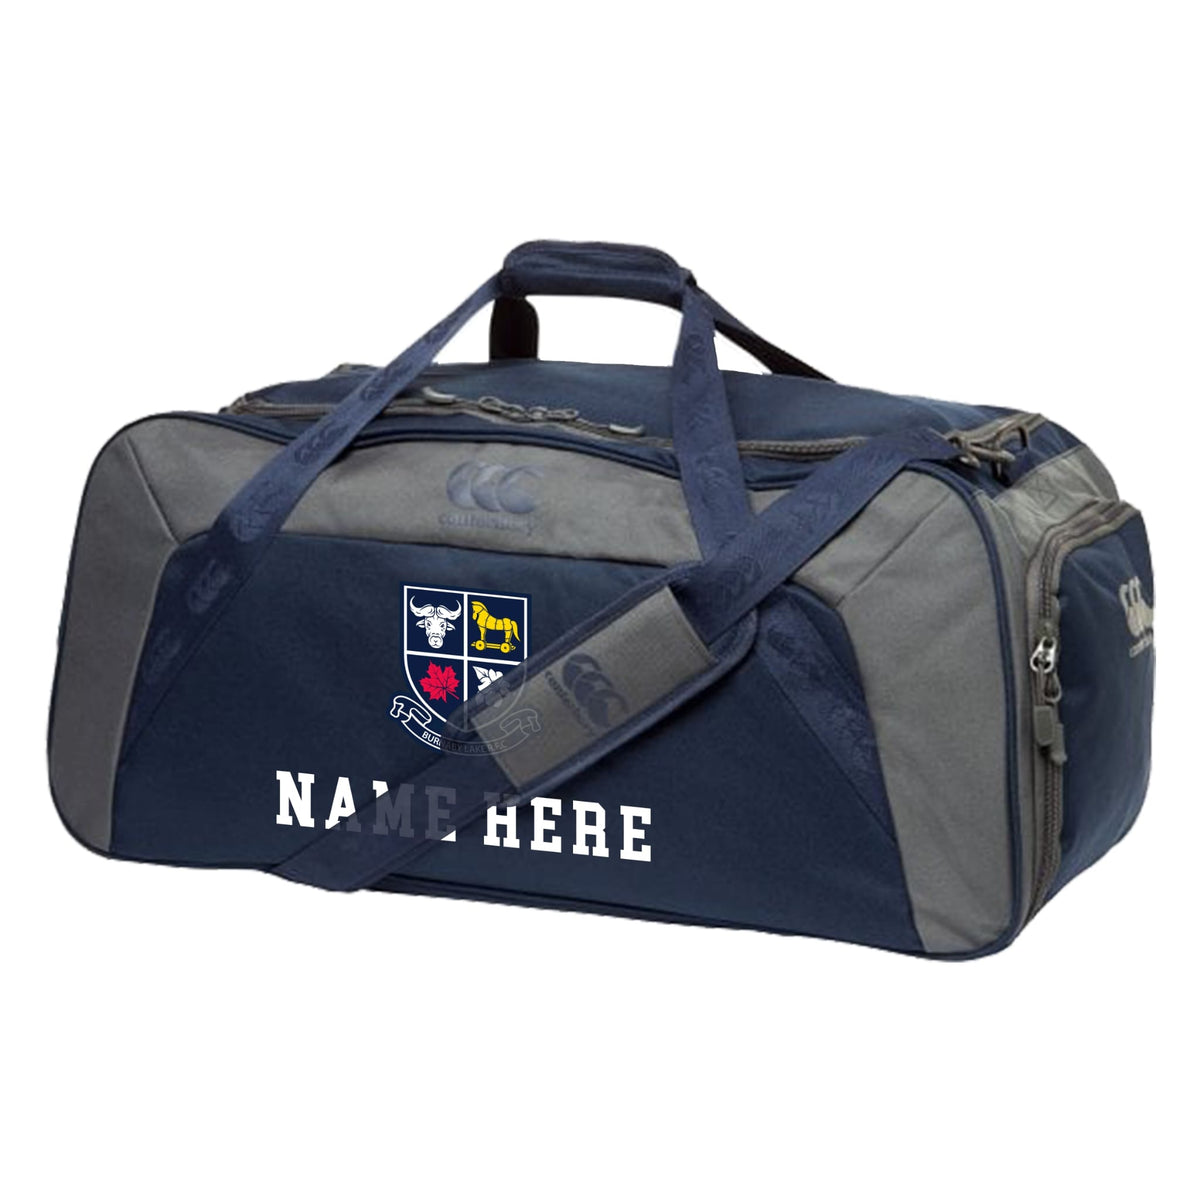 Burnaby Lake Rugby Club Official Canterbury Holdall Bag - Navy